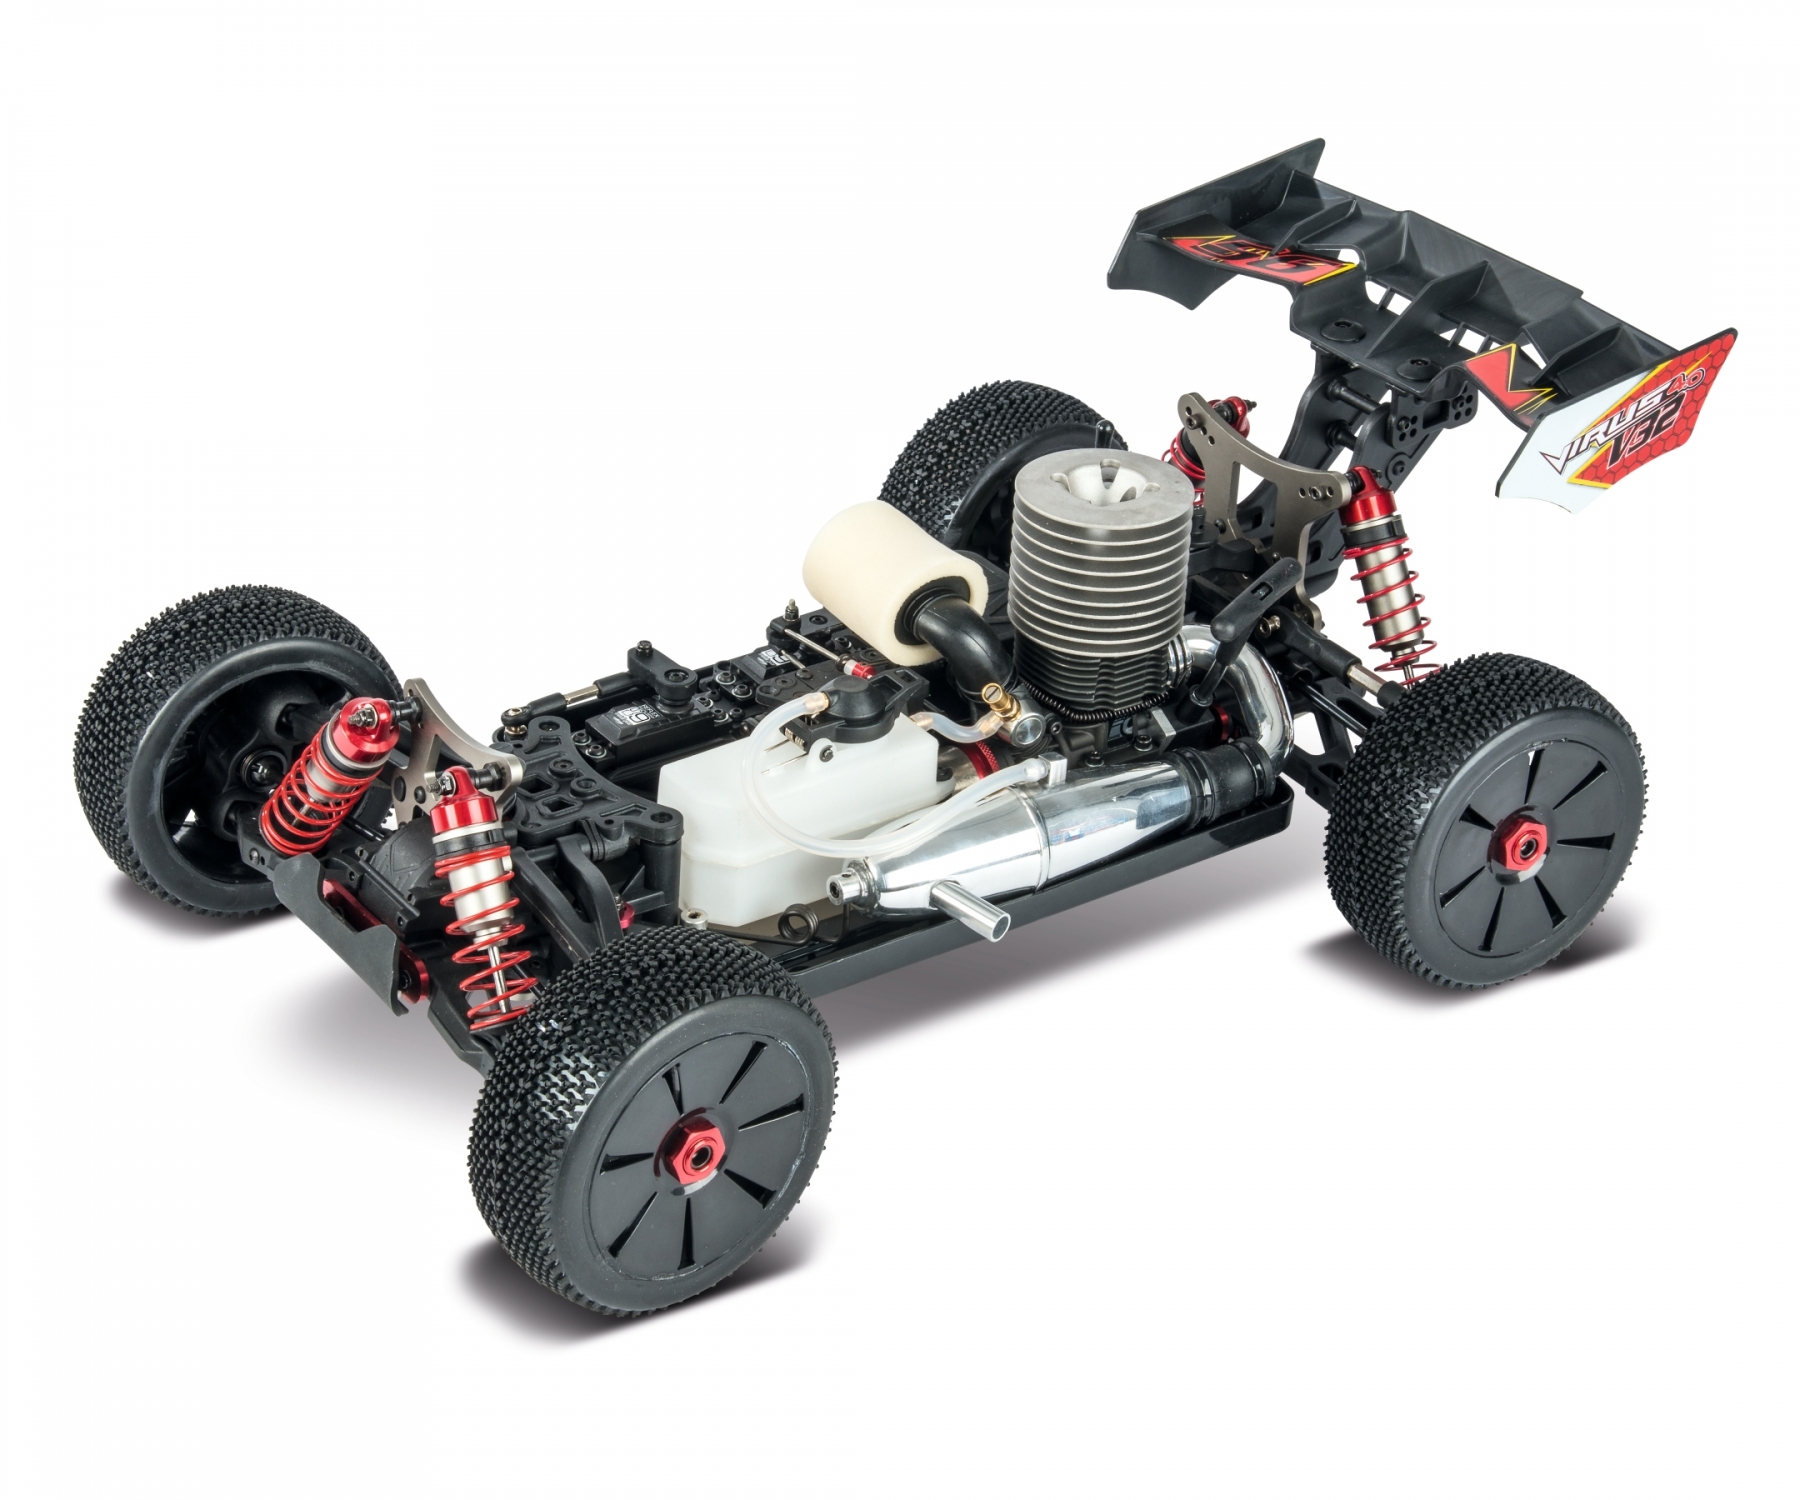 Buggy Virus 4.0 Pro V32 4WD Thermique RTR - 1/8 - CARSON 500204033